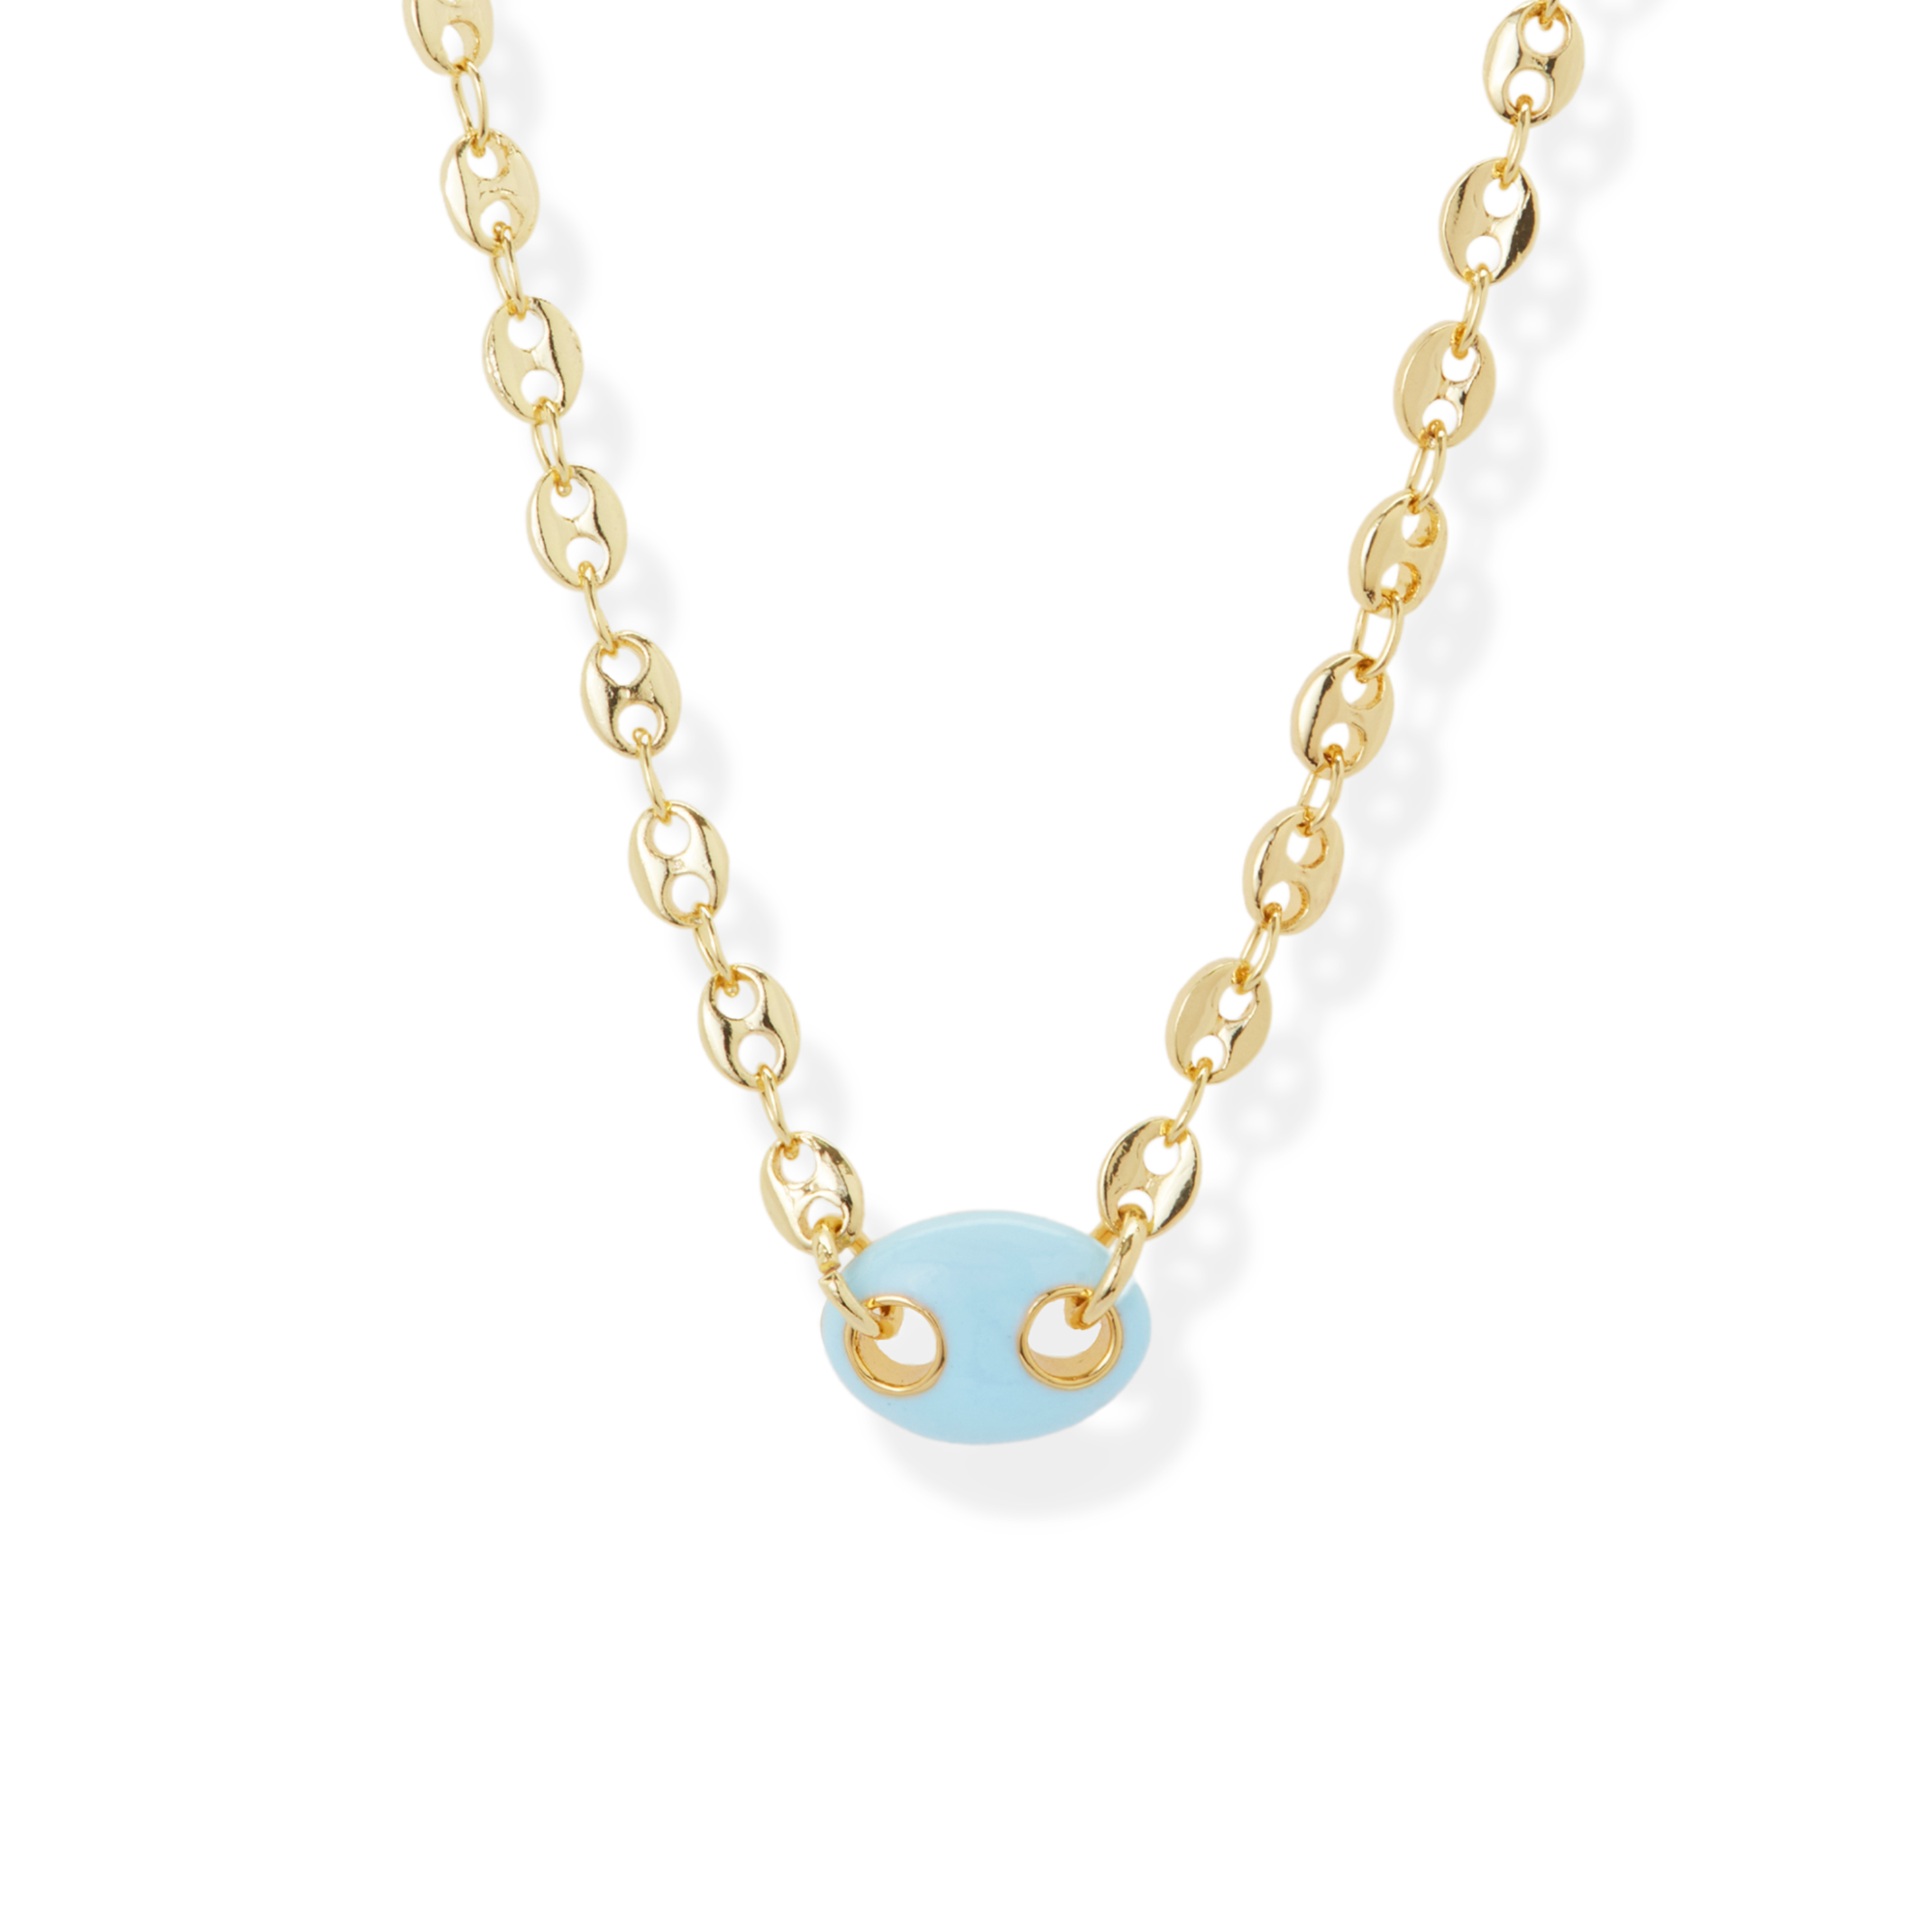 THE LIGHT BLUE ENAMEL MARINER CHAIN NECKLACE